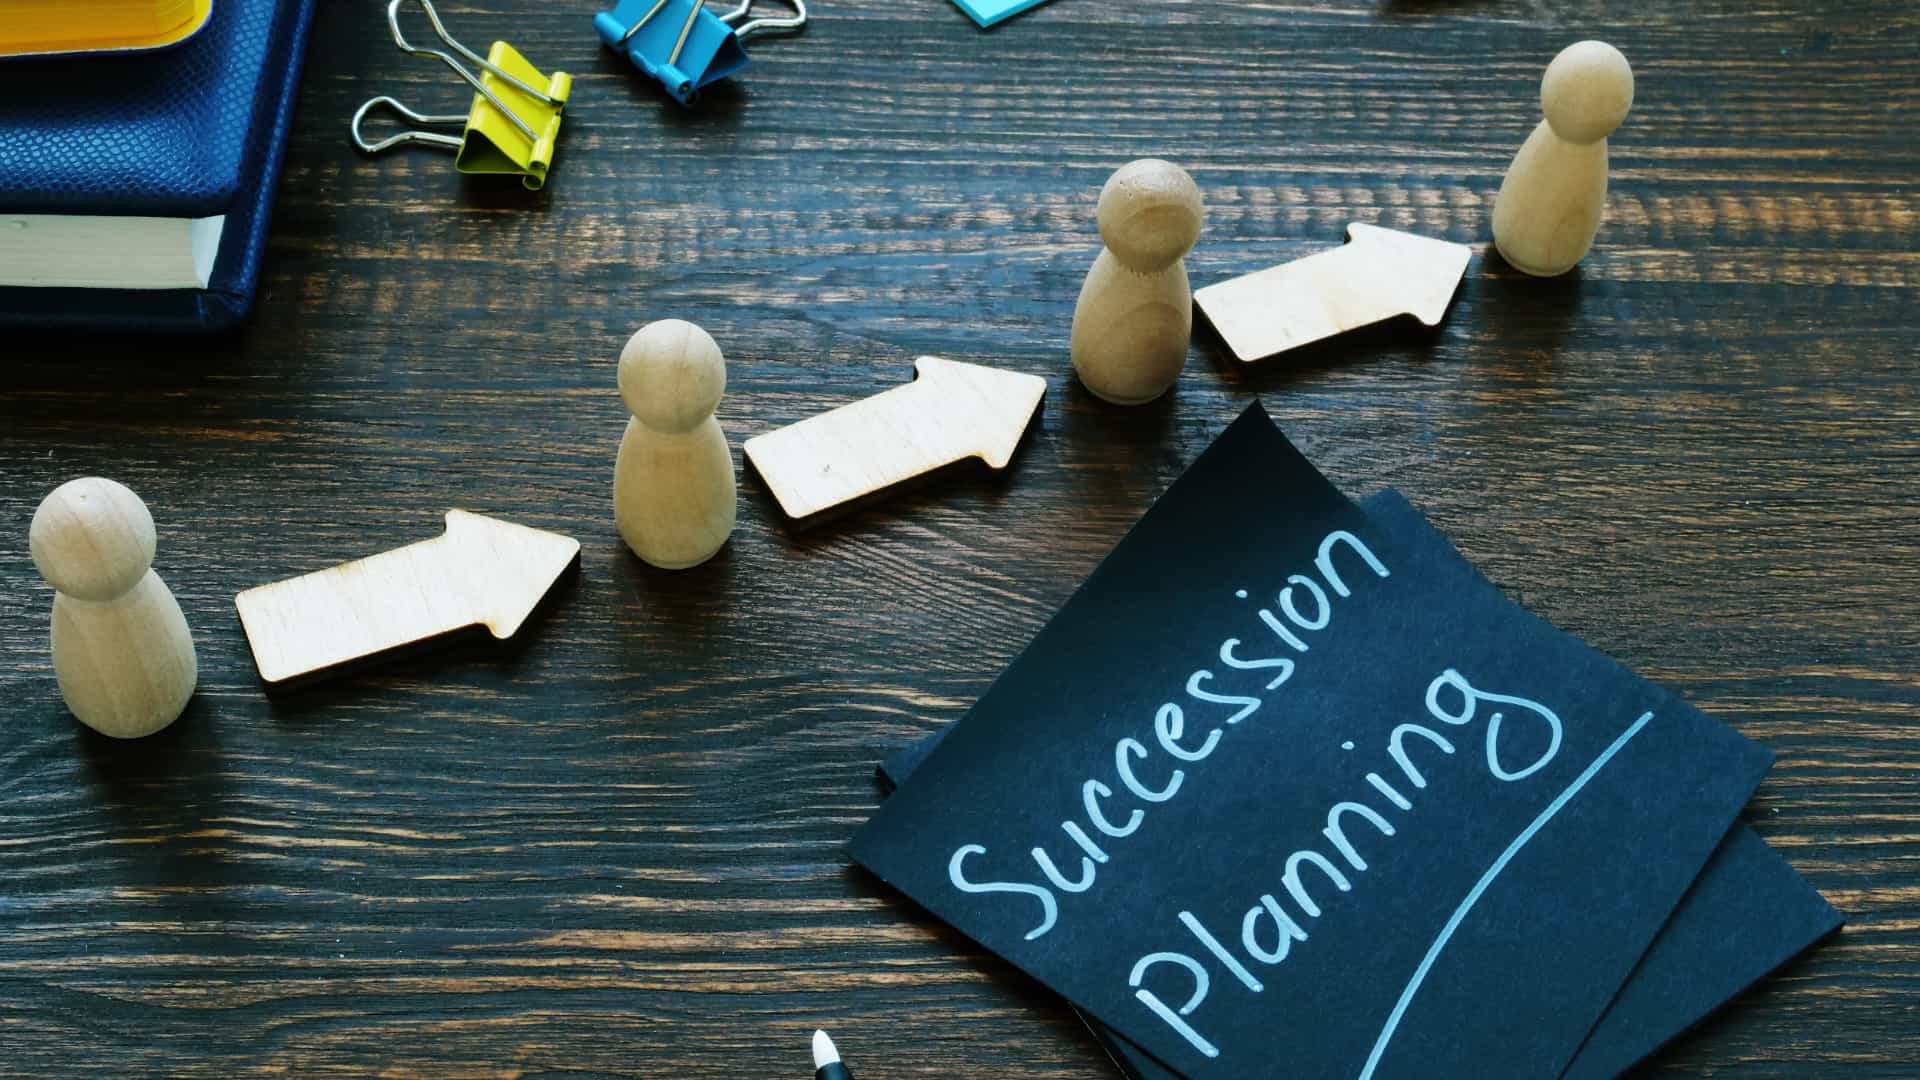 Succession planning sign and figurines with arrows.